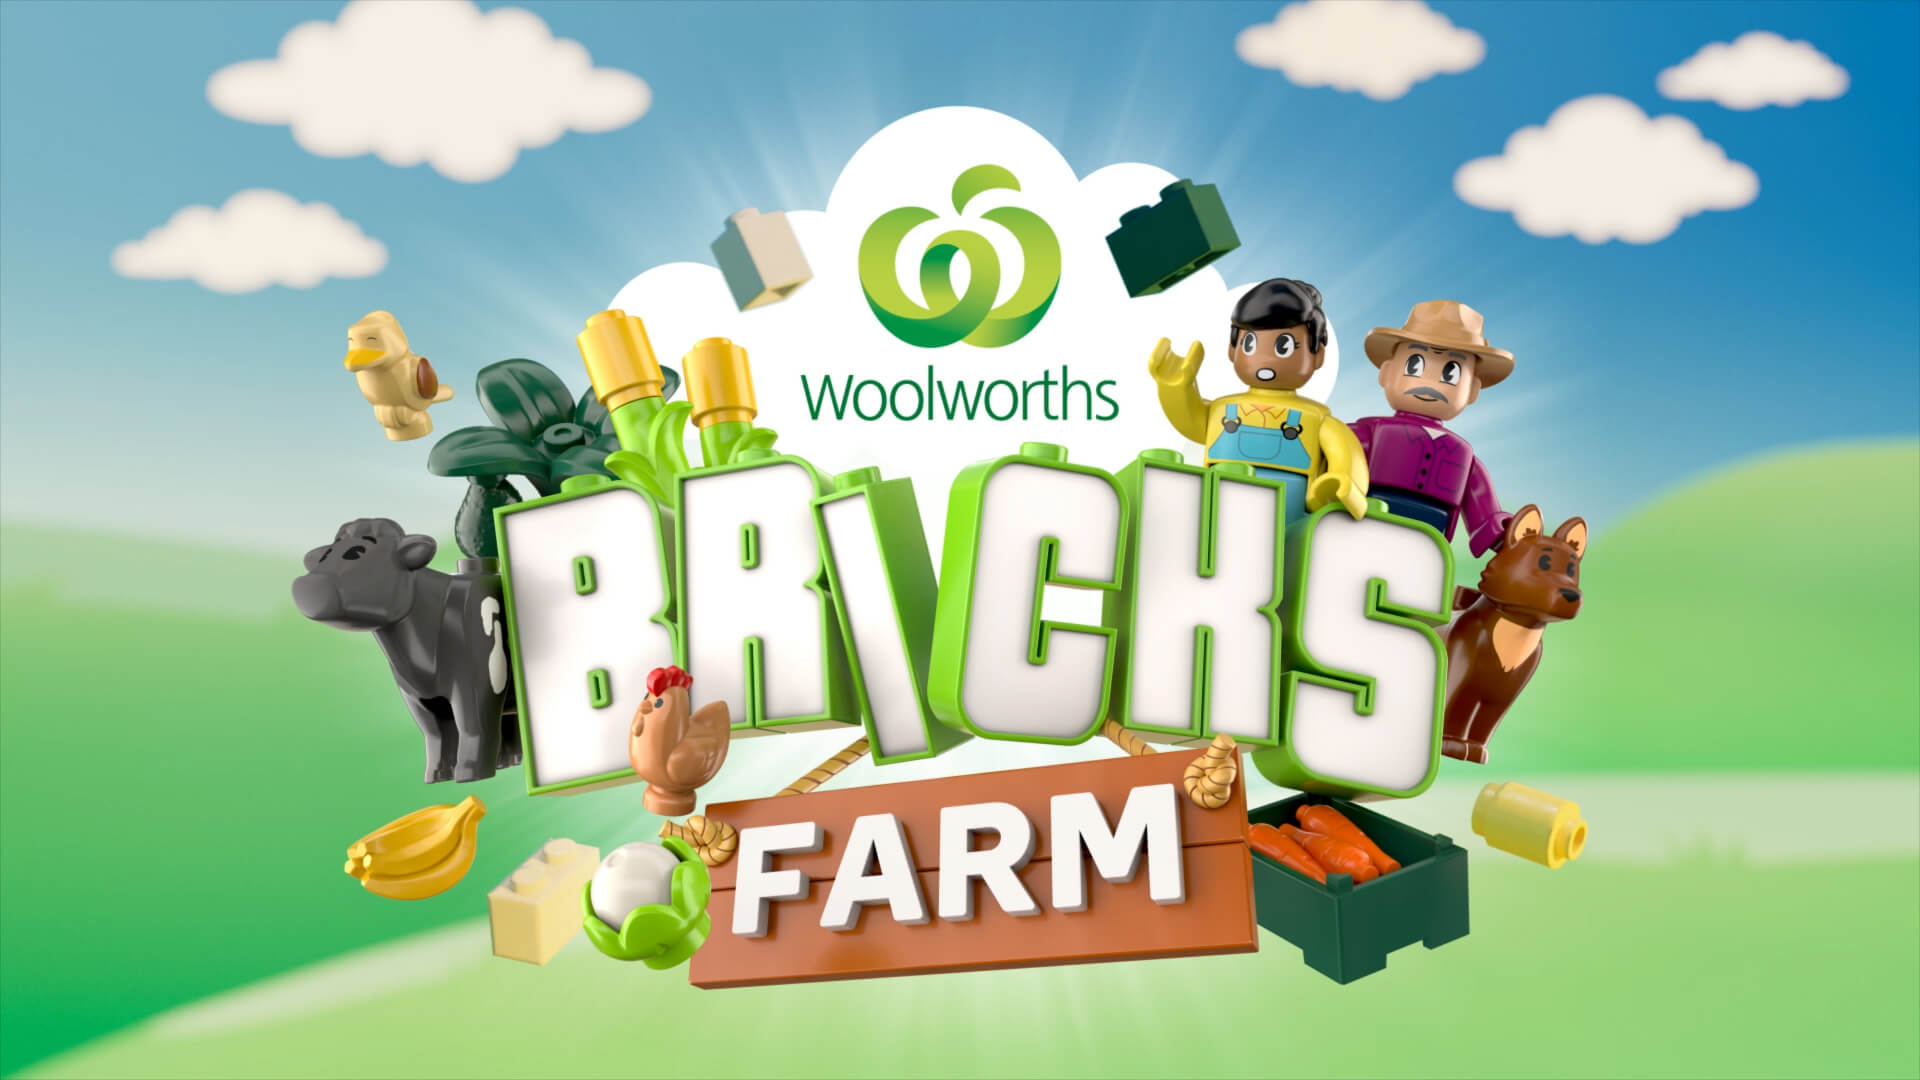 Image showing Woolworths Bricks Farm motion graphics animation frame.